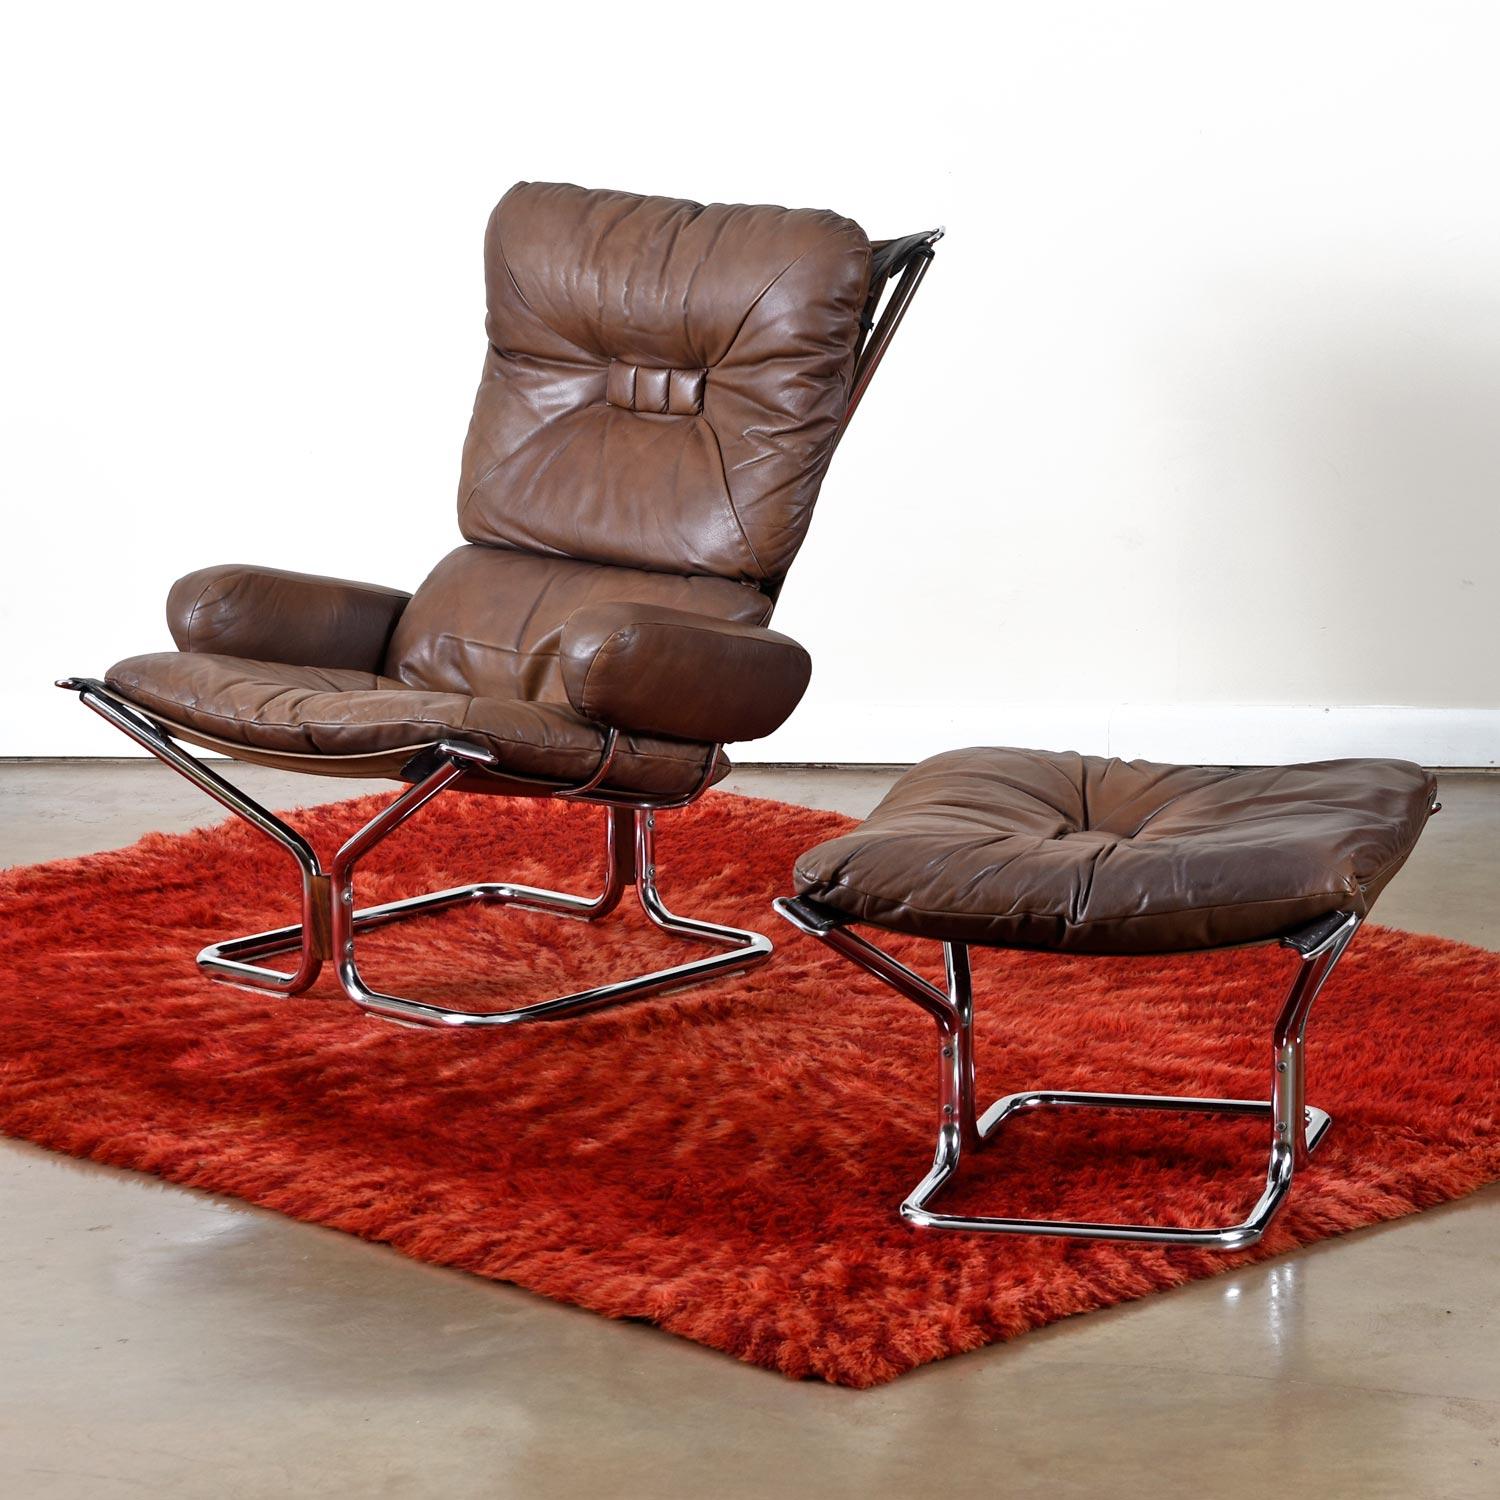 Vintage Ingmar Relling leather lounge chair and ottoman exported to the U.S. market by Westnofa of Norway. Accented with rosewood and decoratively baffle box stitched to showcase an elevated and tailored look to the otherwise minimal, modern design.